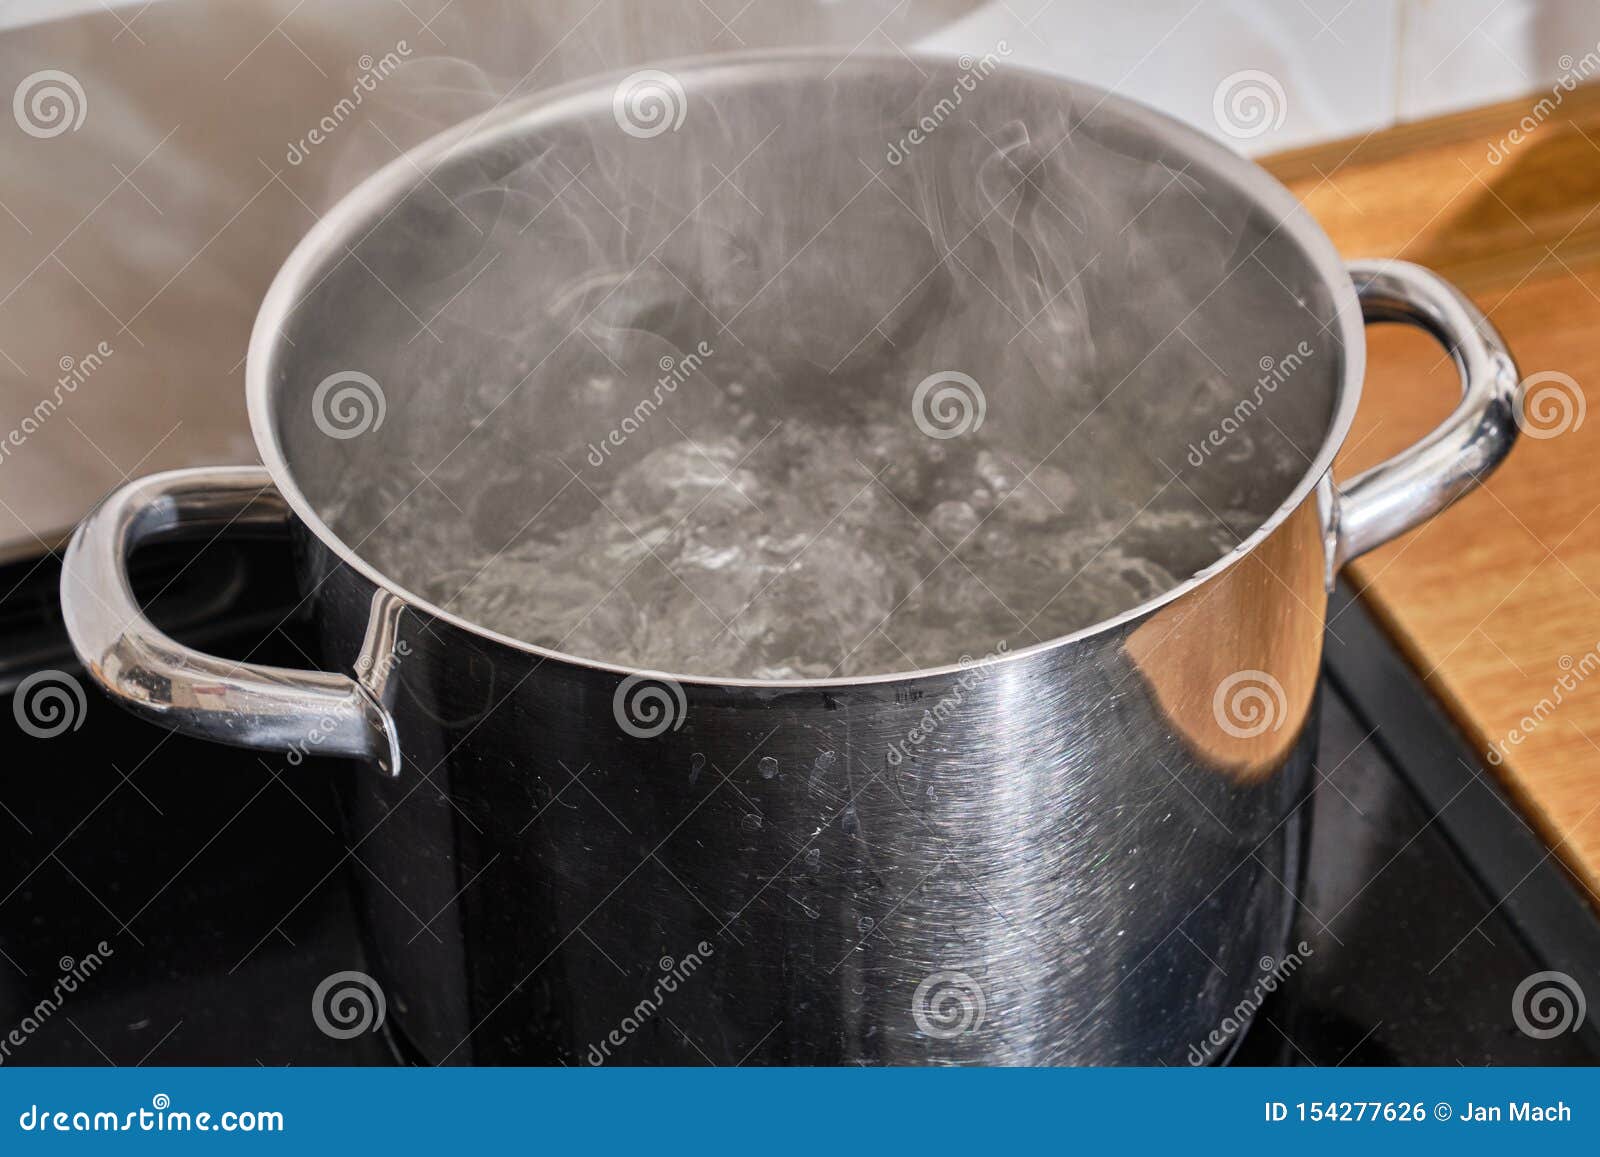 Boiling Water in a Cooking Pot on the Cooker Stock Photo - Image of  kitchenware, chef: 111312522